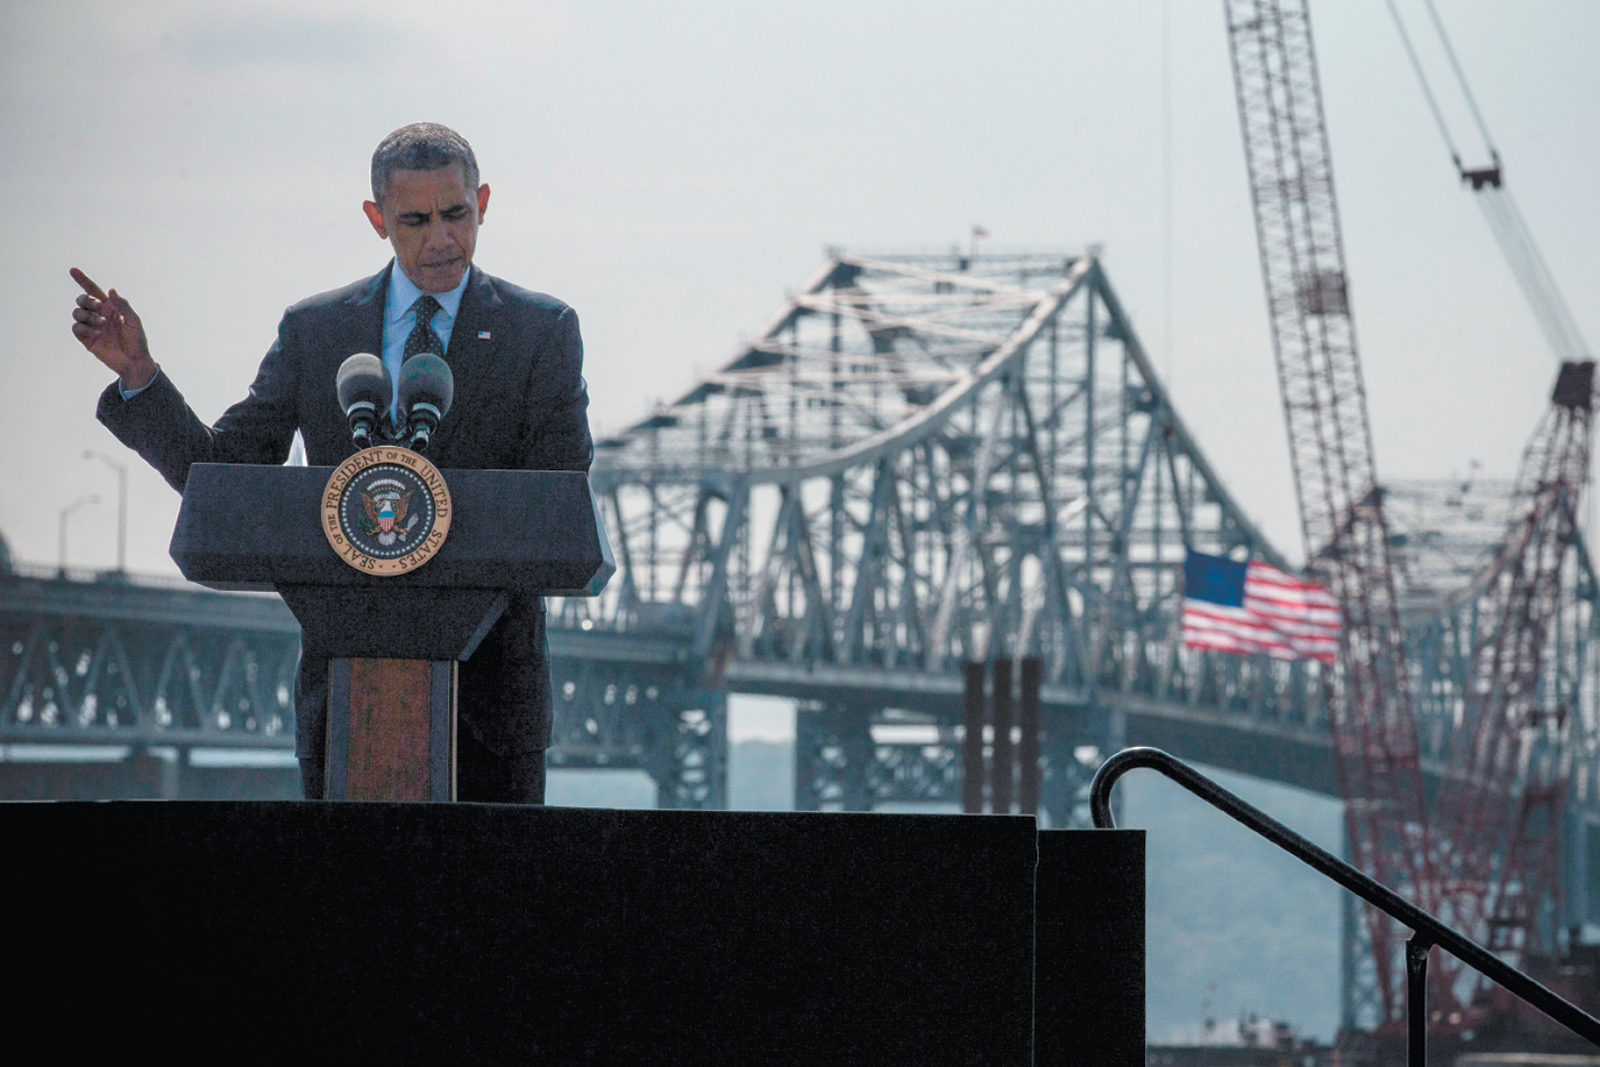 President Obama delivering remarks on infrastructure in the United States near the Tappan Zee Bridge and the construction of its replacement, Tarrytown, New York, May 2014